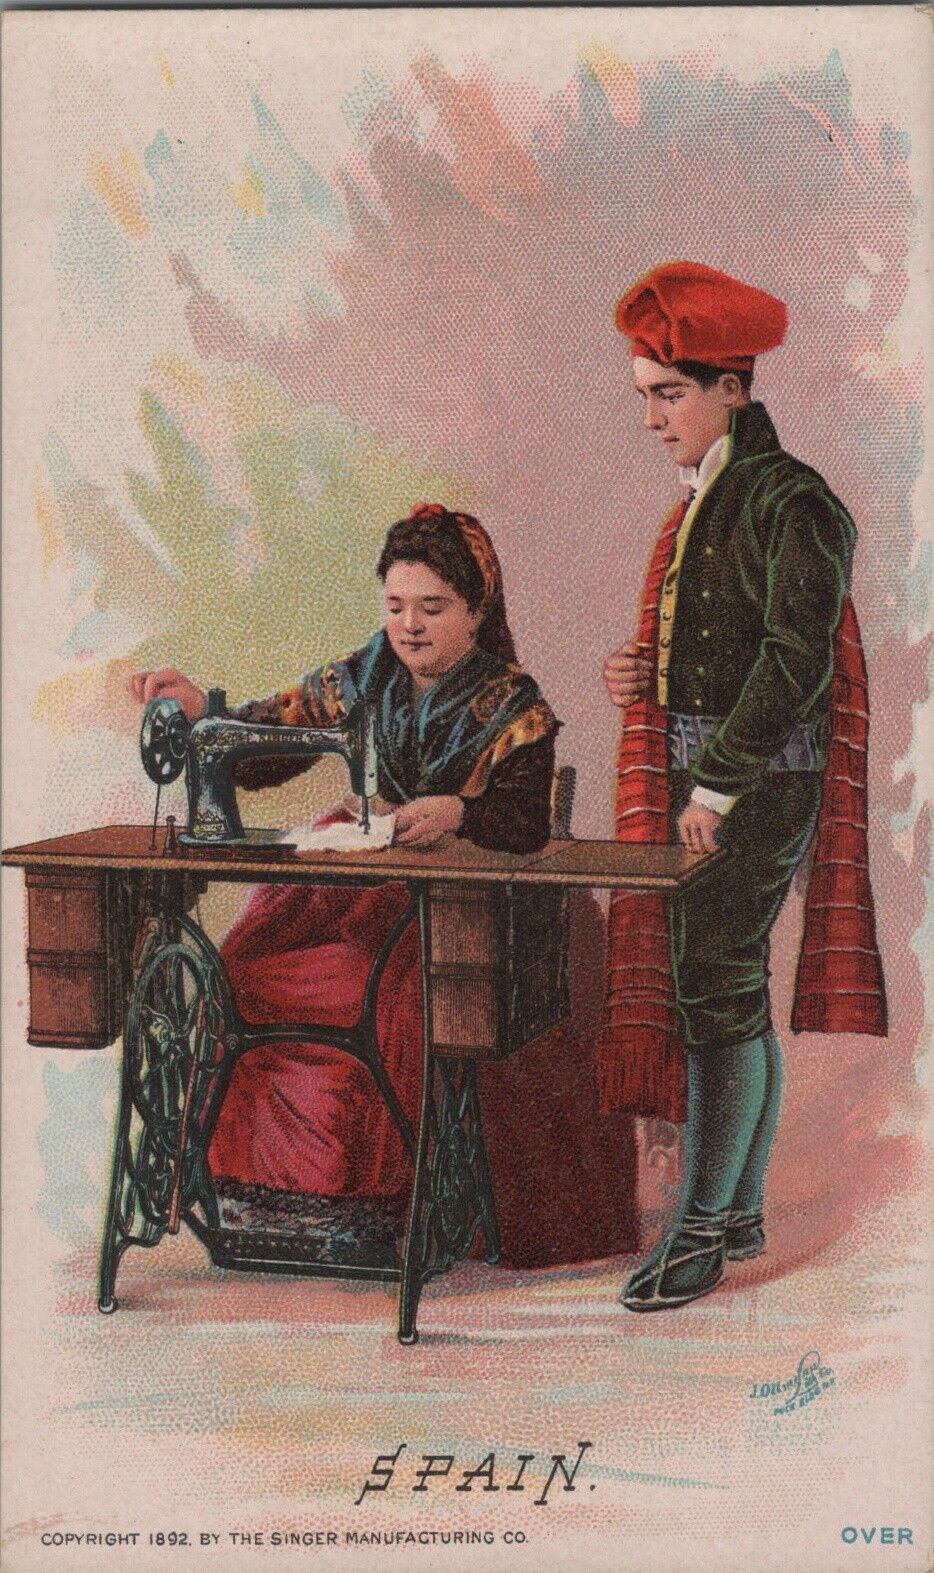 c1892 Singer Manufacturing Co. Sewing Trade Card SPAIN Barcelona Costumes Nation